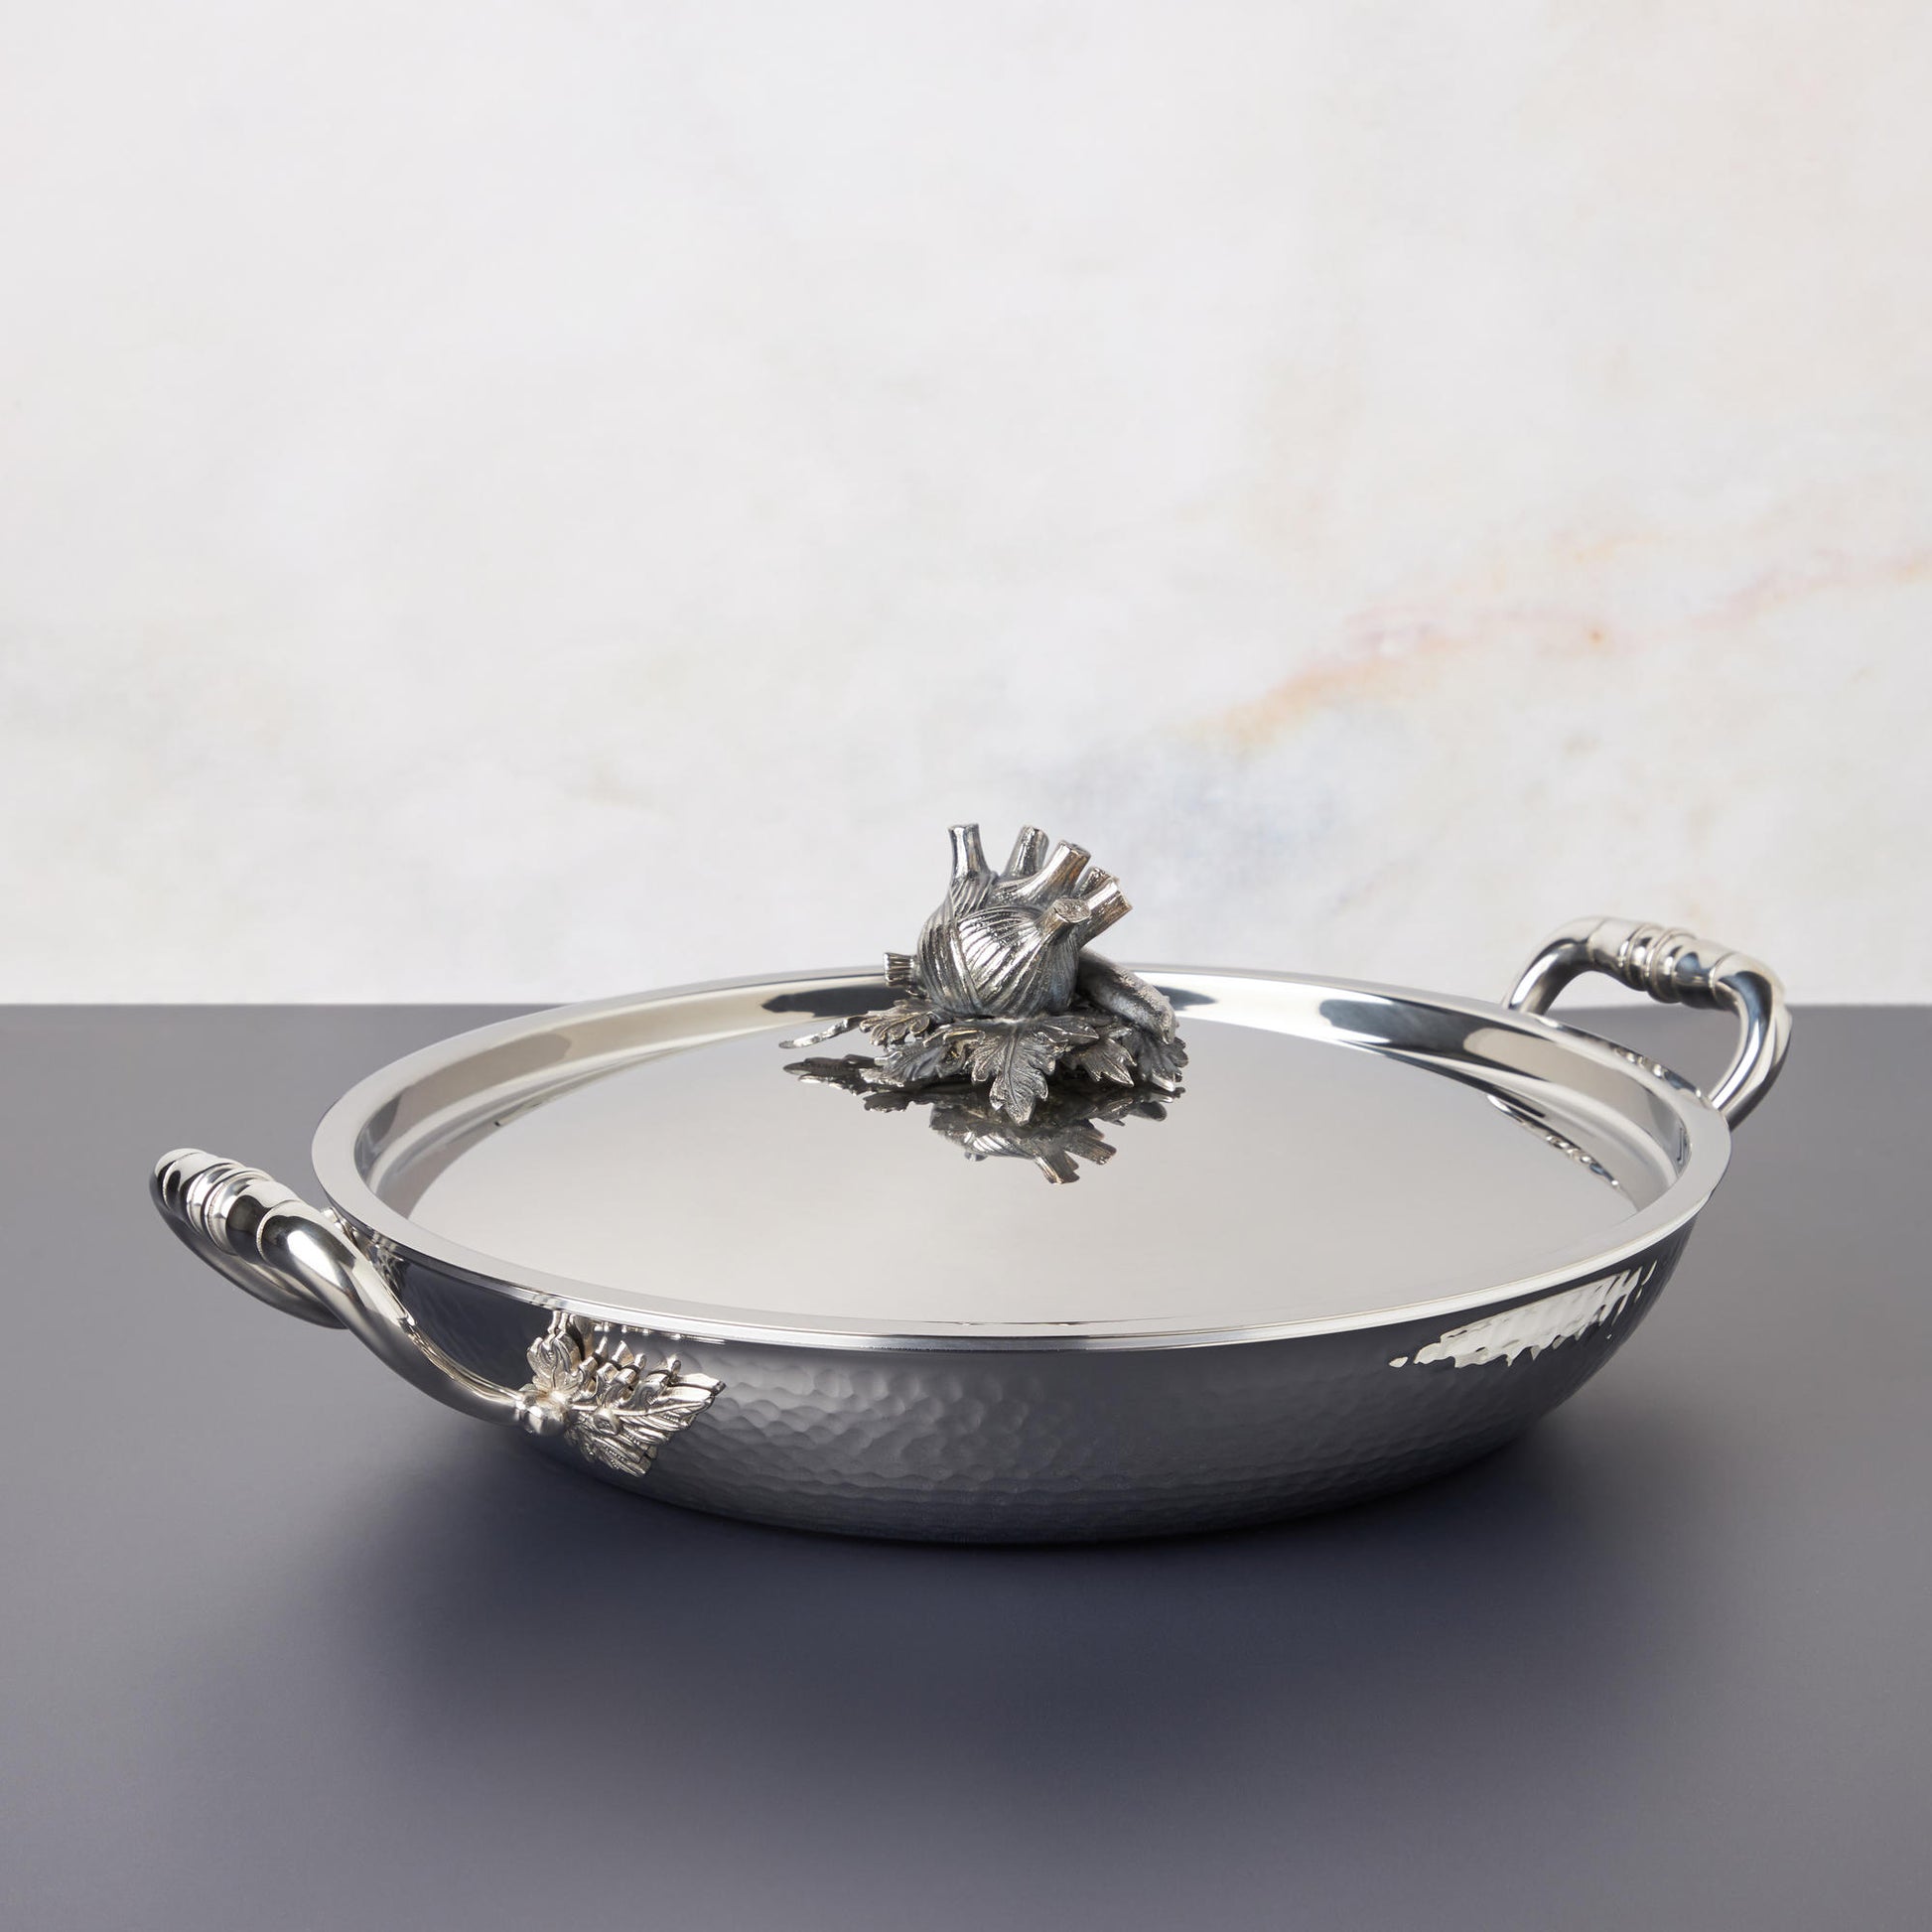 Opus Prima hammered clad stainless steel gratin with decorated silver-plated lid knob finial from Ruffoni